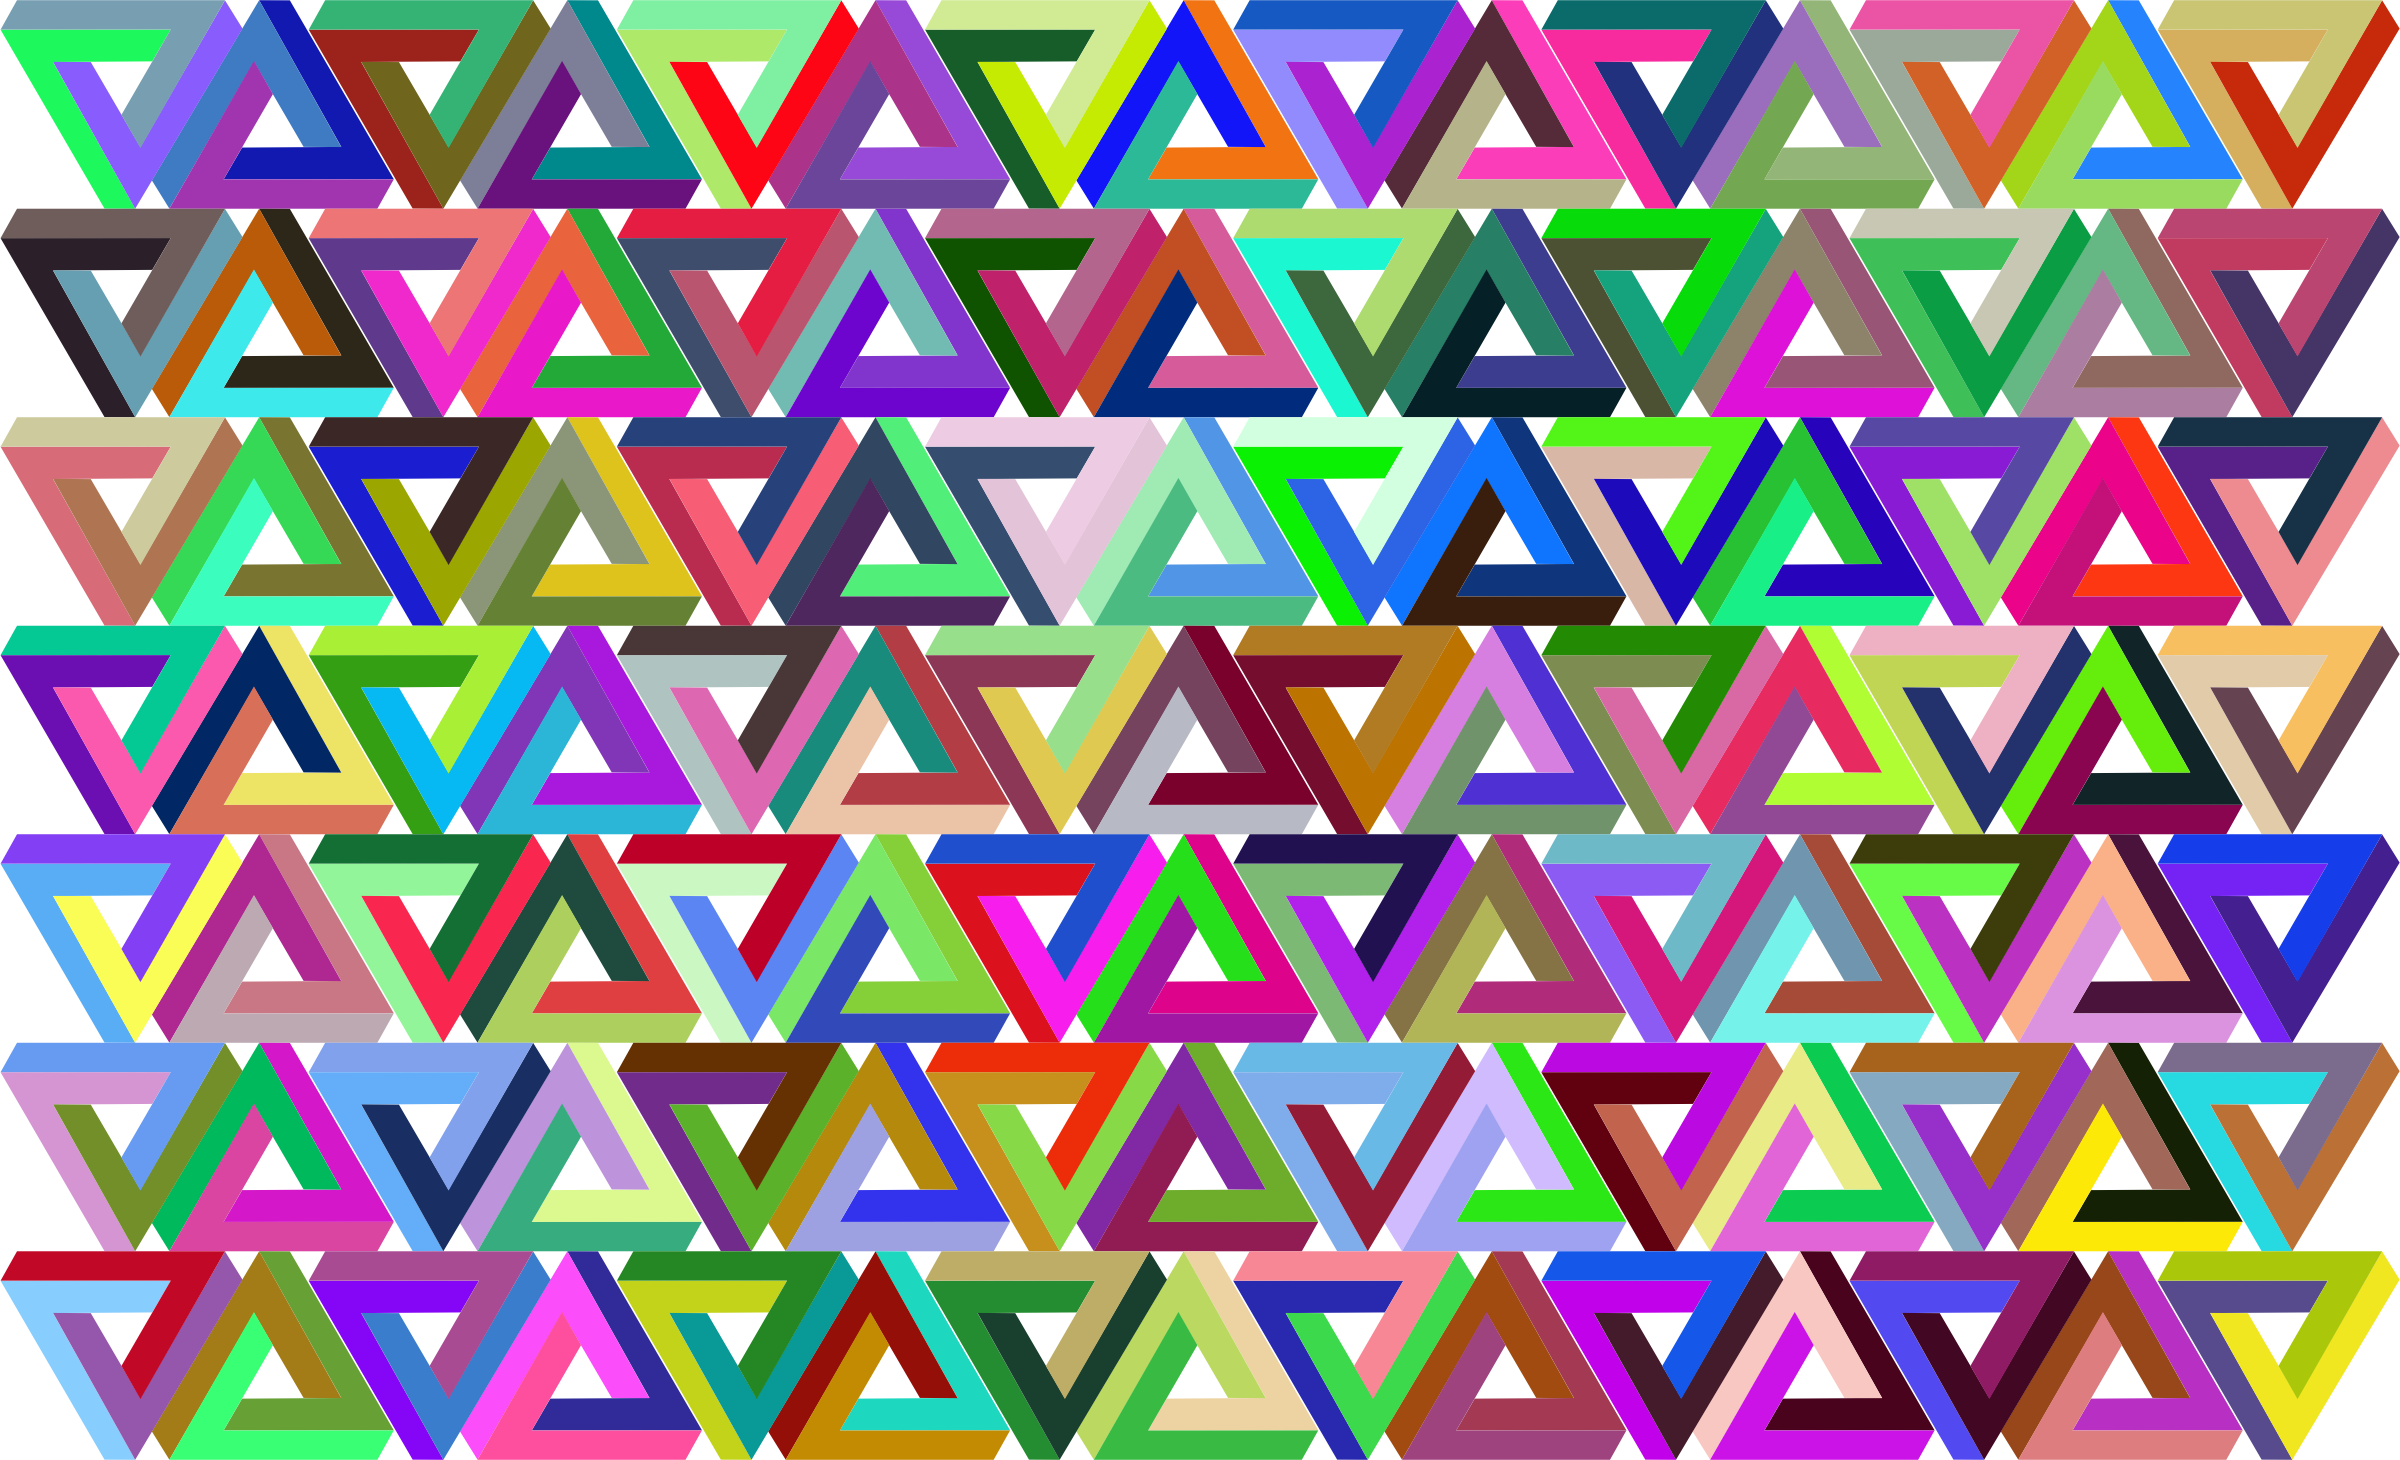 pattern clipart triangle